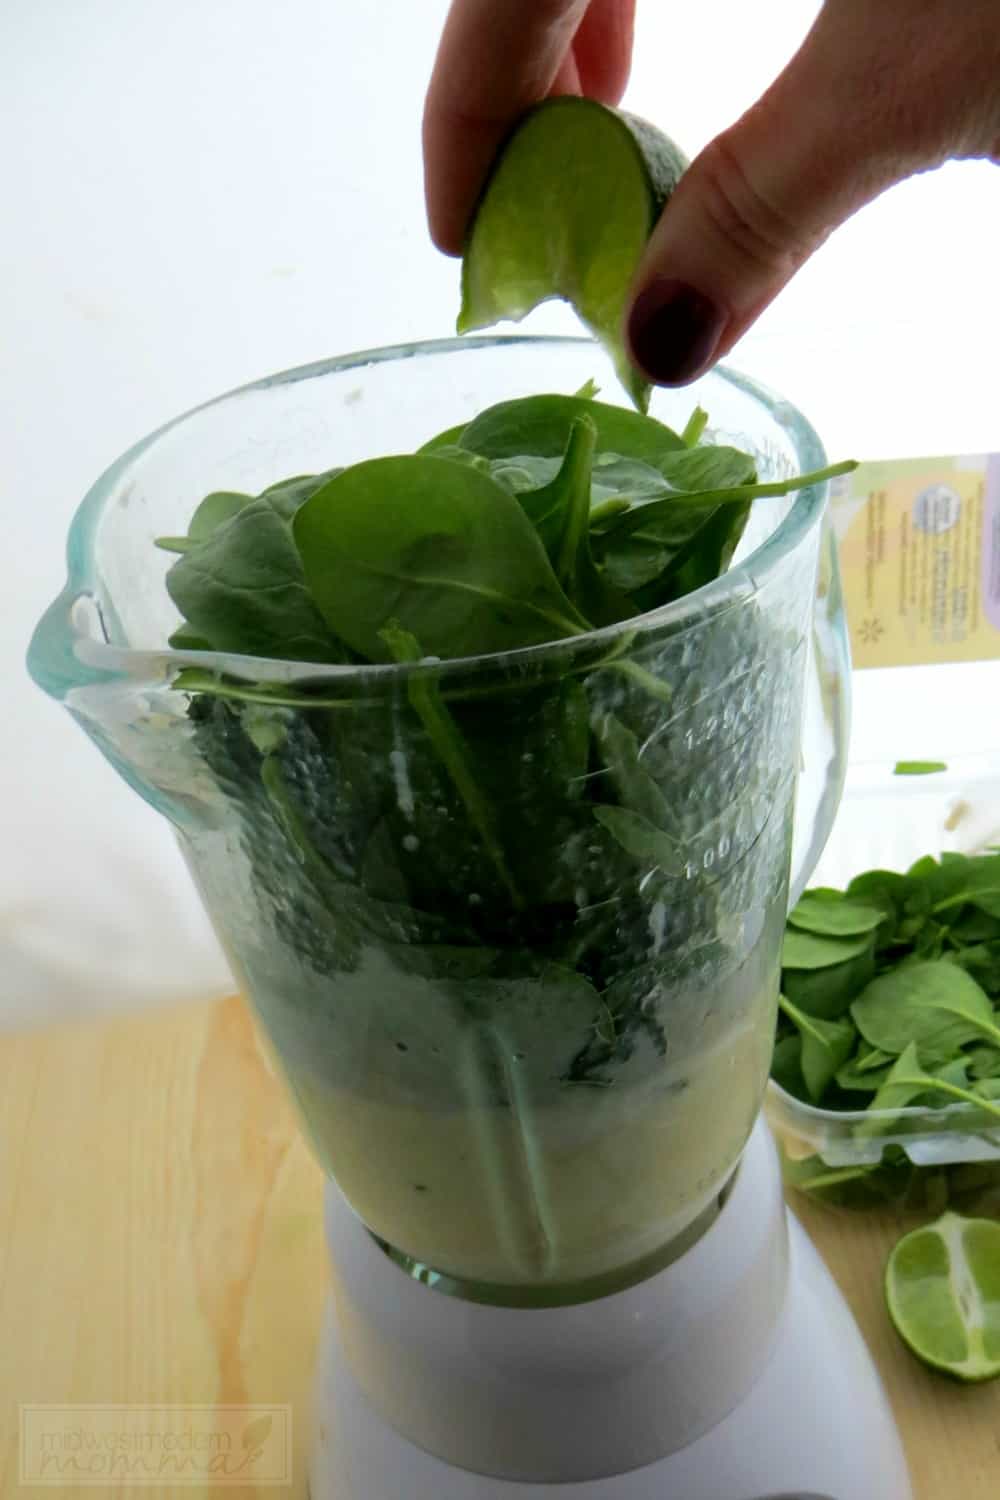 Hand squeezing a lime slice into a blender pitcher full of spinach leaves and a light coloured liquid.